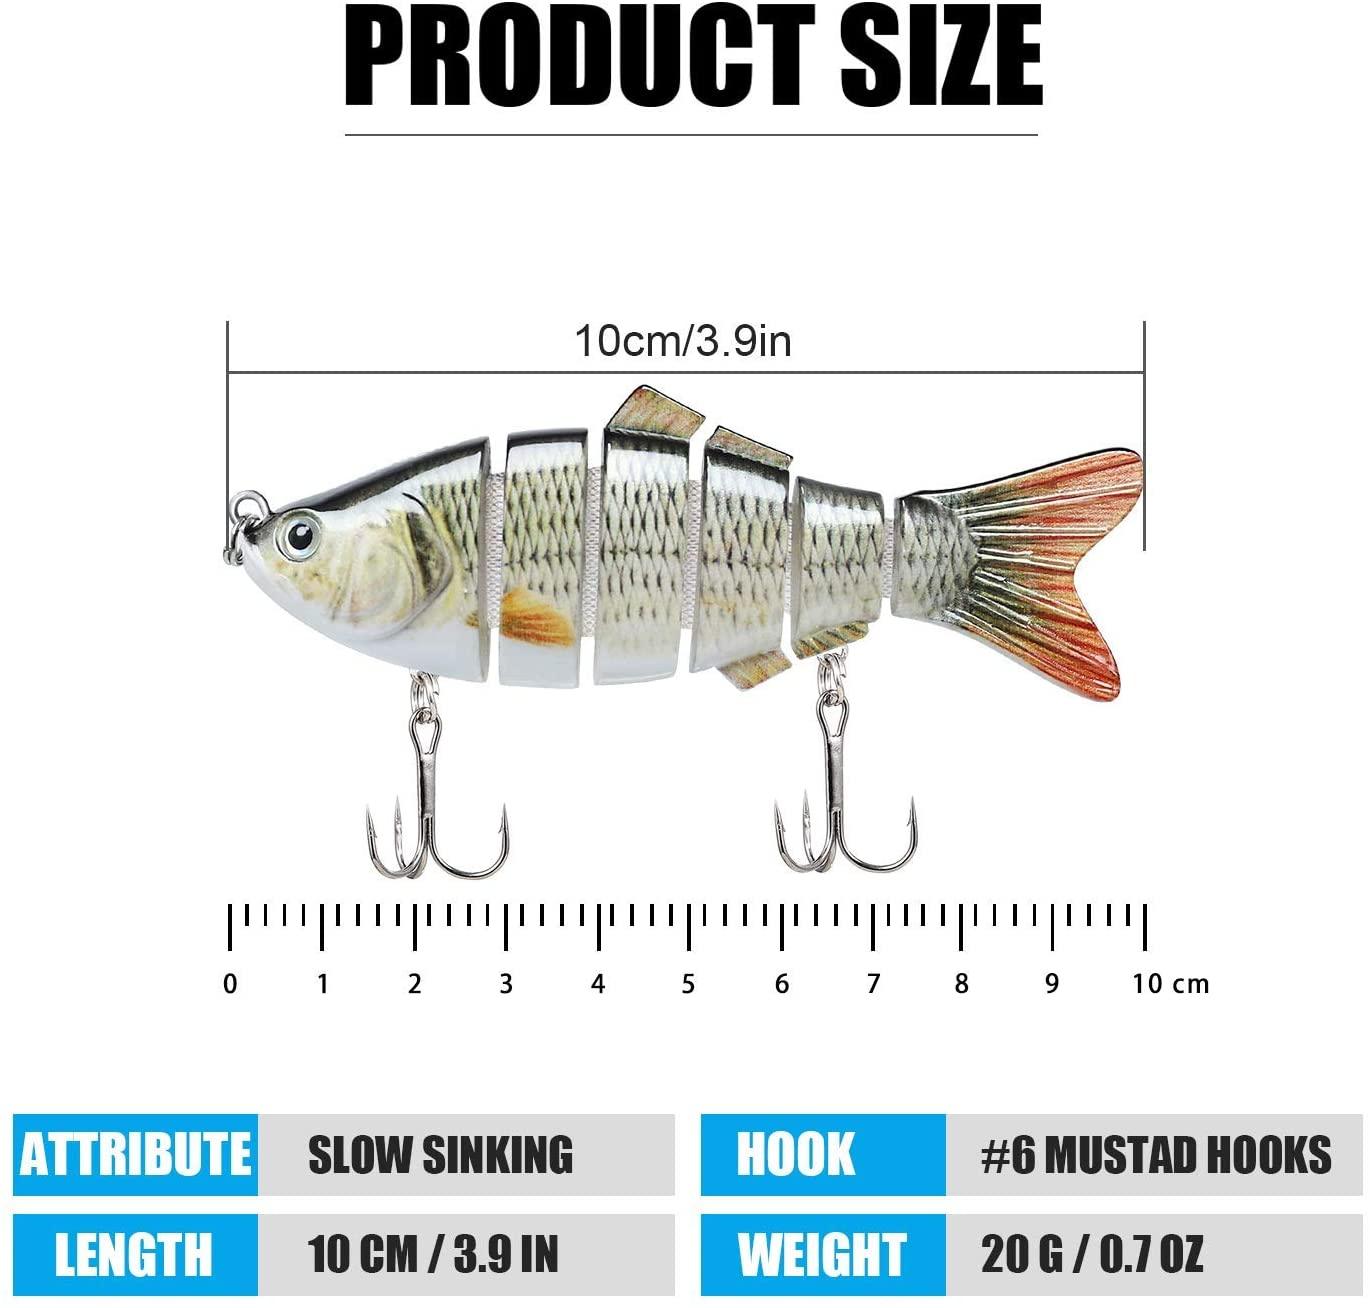 TRUSCEND Multi Jointed Swimbait 6 Segments Lure for Bass - Truscend Fishing